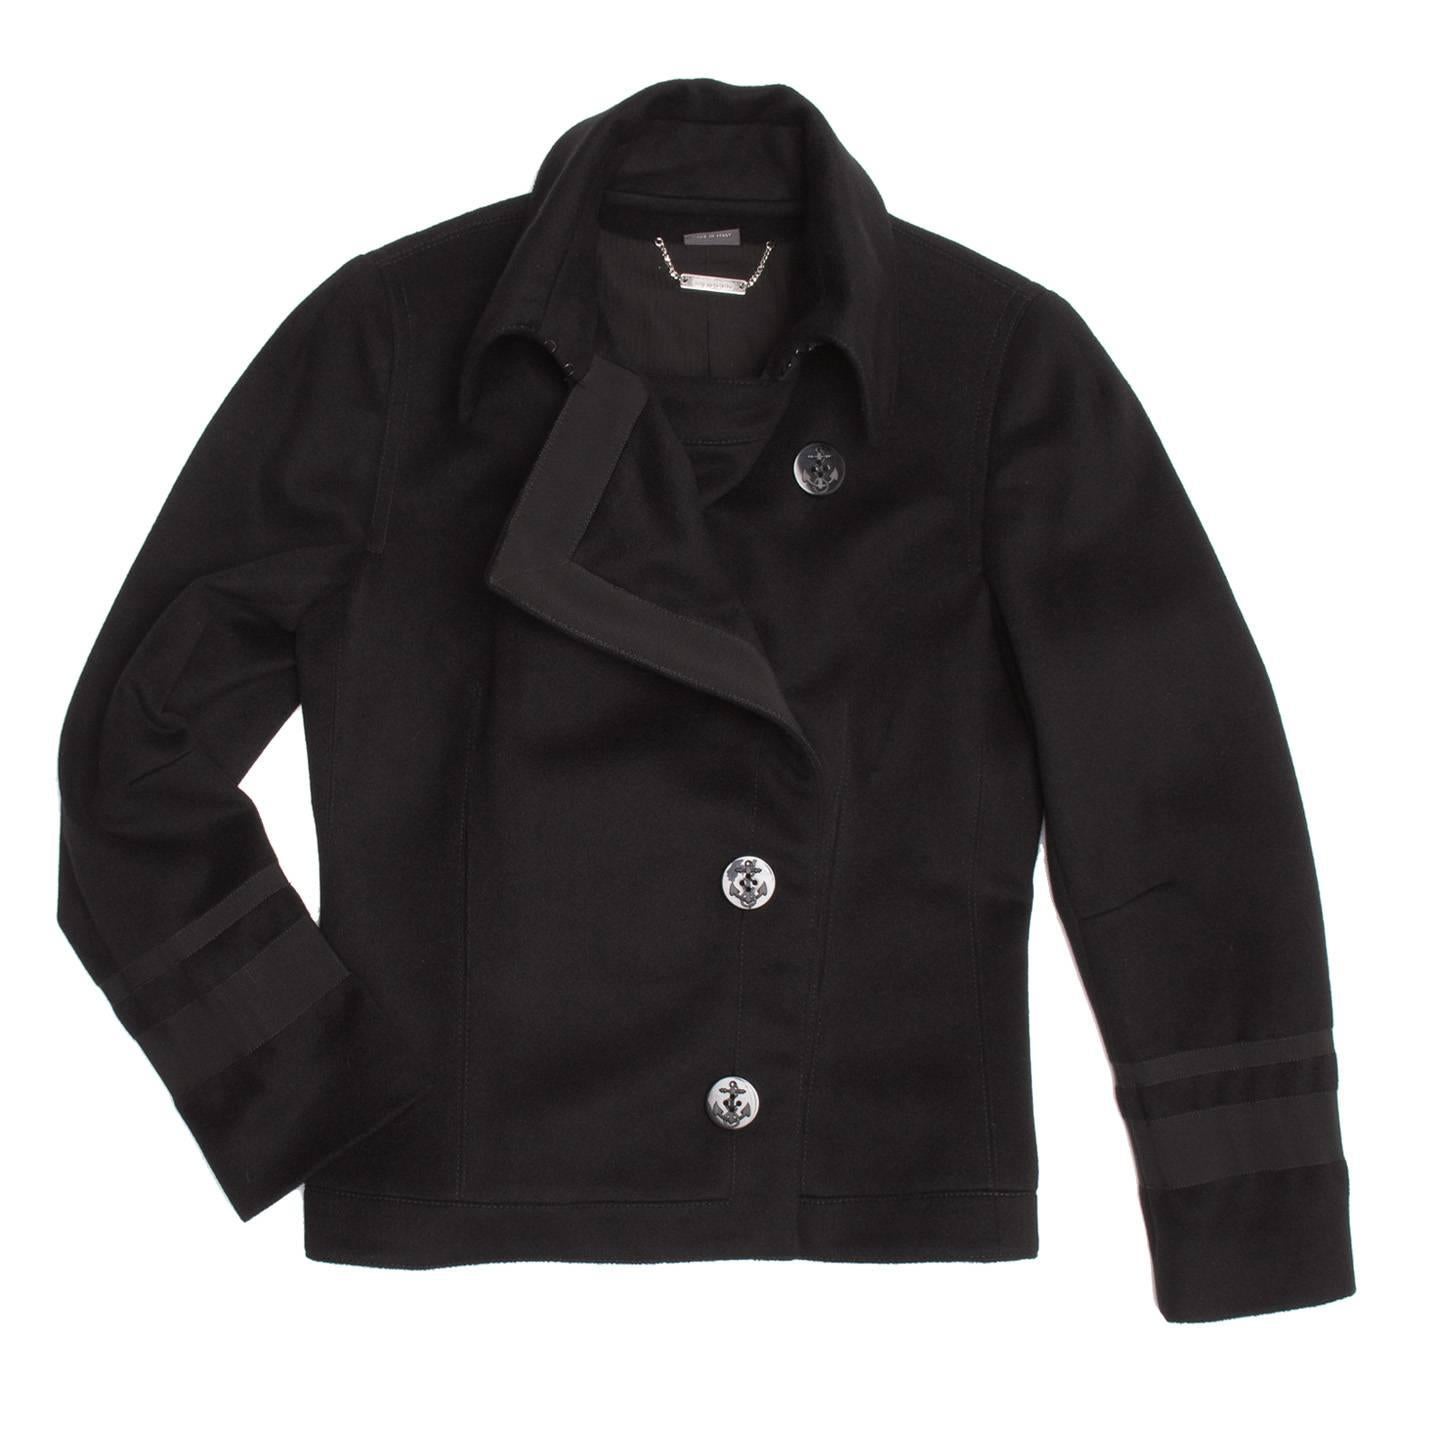 Alexander McQueen Black Cashmere Peacoat In Excellent Condition For Sale In Brooklyn, NY